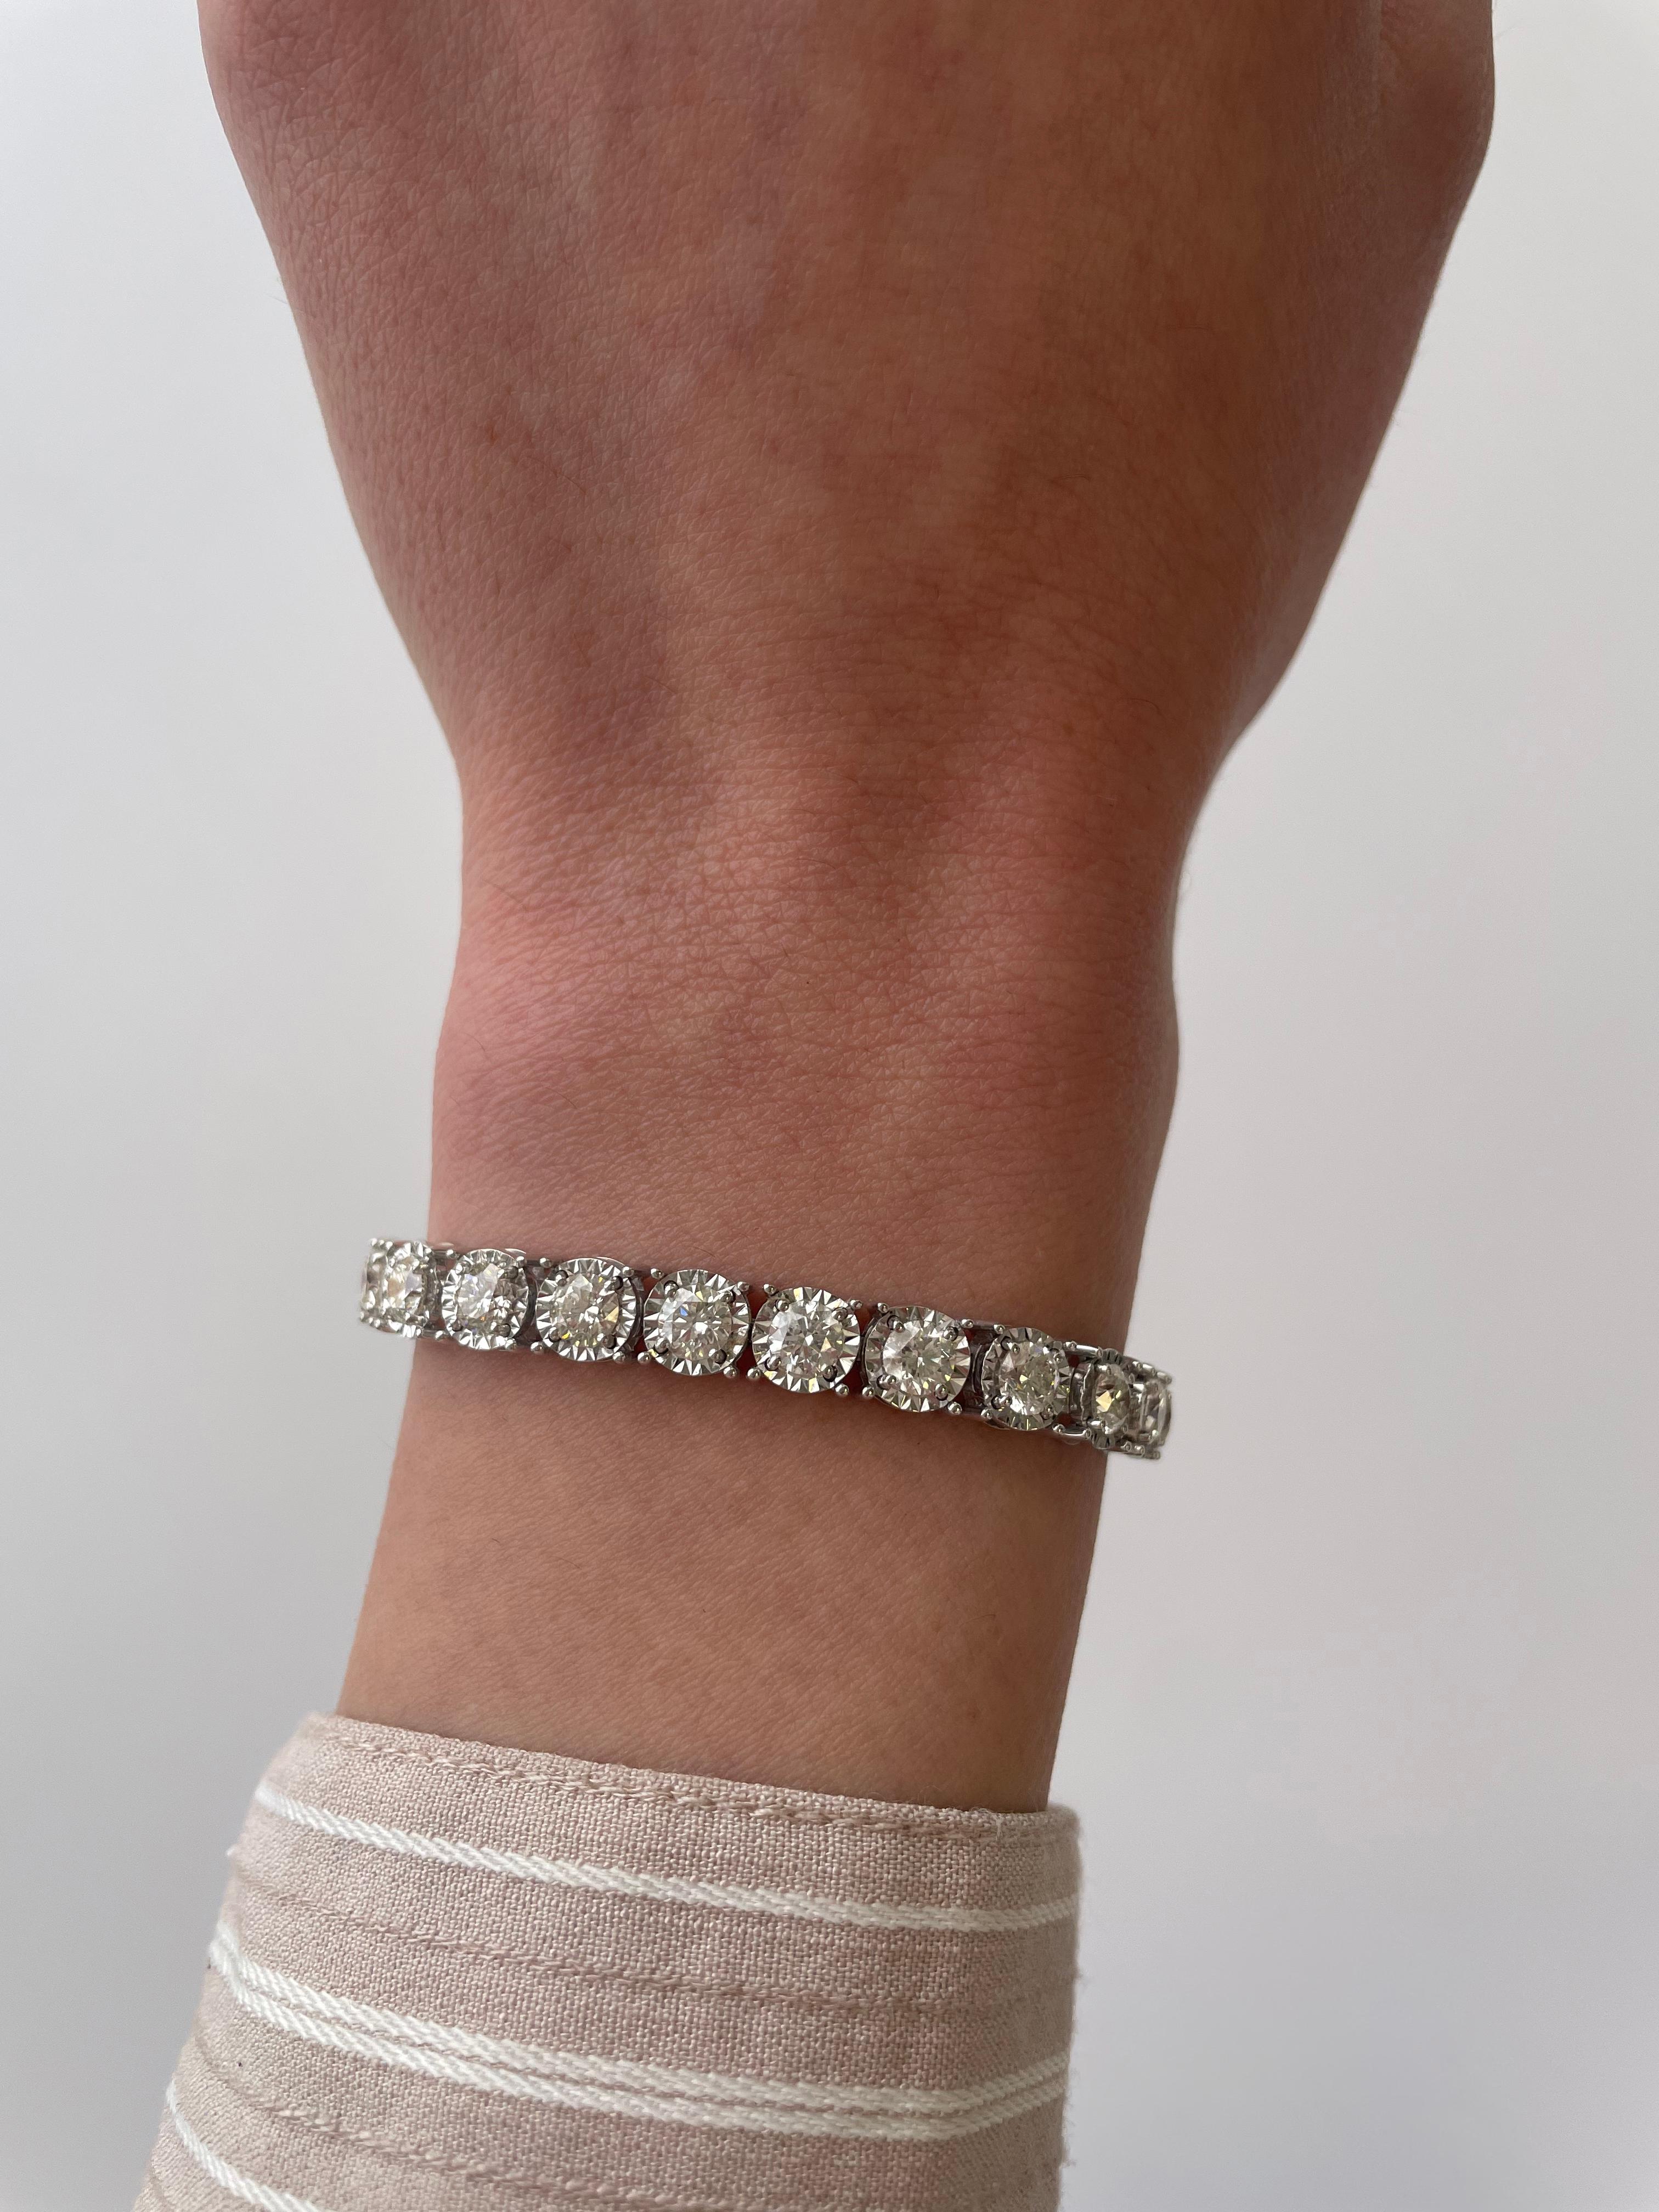 Exquisite and timeless illusion set diamonds tennis bracelet, by Alexander Beverly Hills.
27 round brilliant diamonds, 8.82 carats total. Approximately G/H color and VS clarity. Four prong set in 18k white gold, 19.11 grams, 7 inches. 
Accommodated